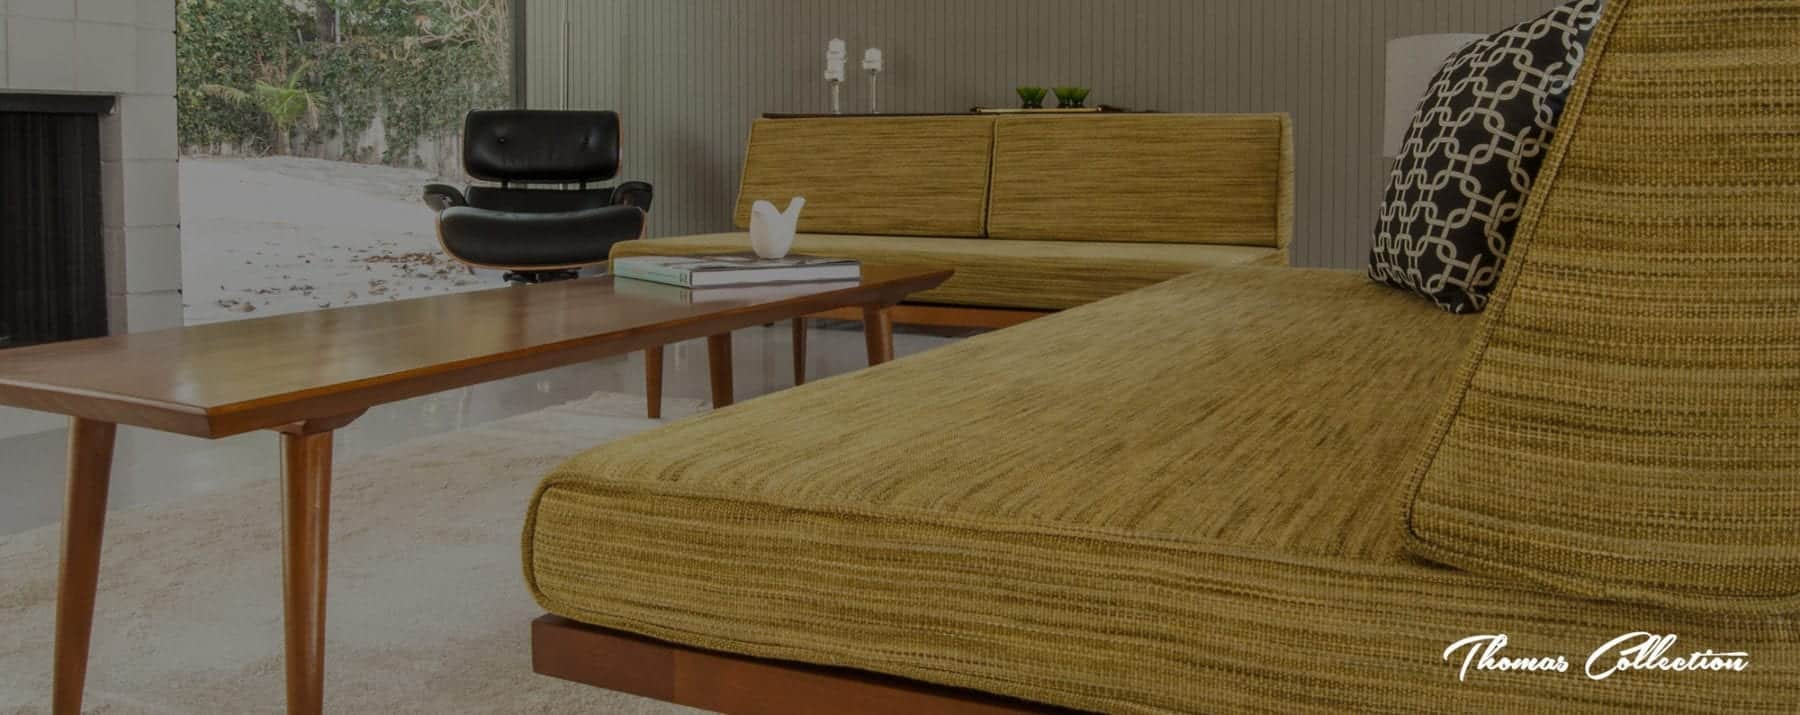 MCM Daybed - mid century modern daybed sofa - affordable mid century modern furniture